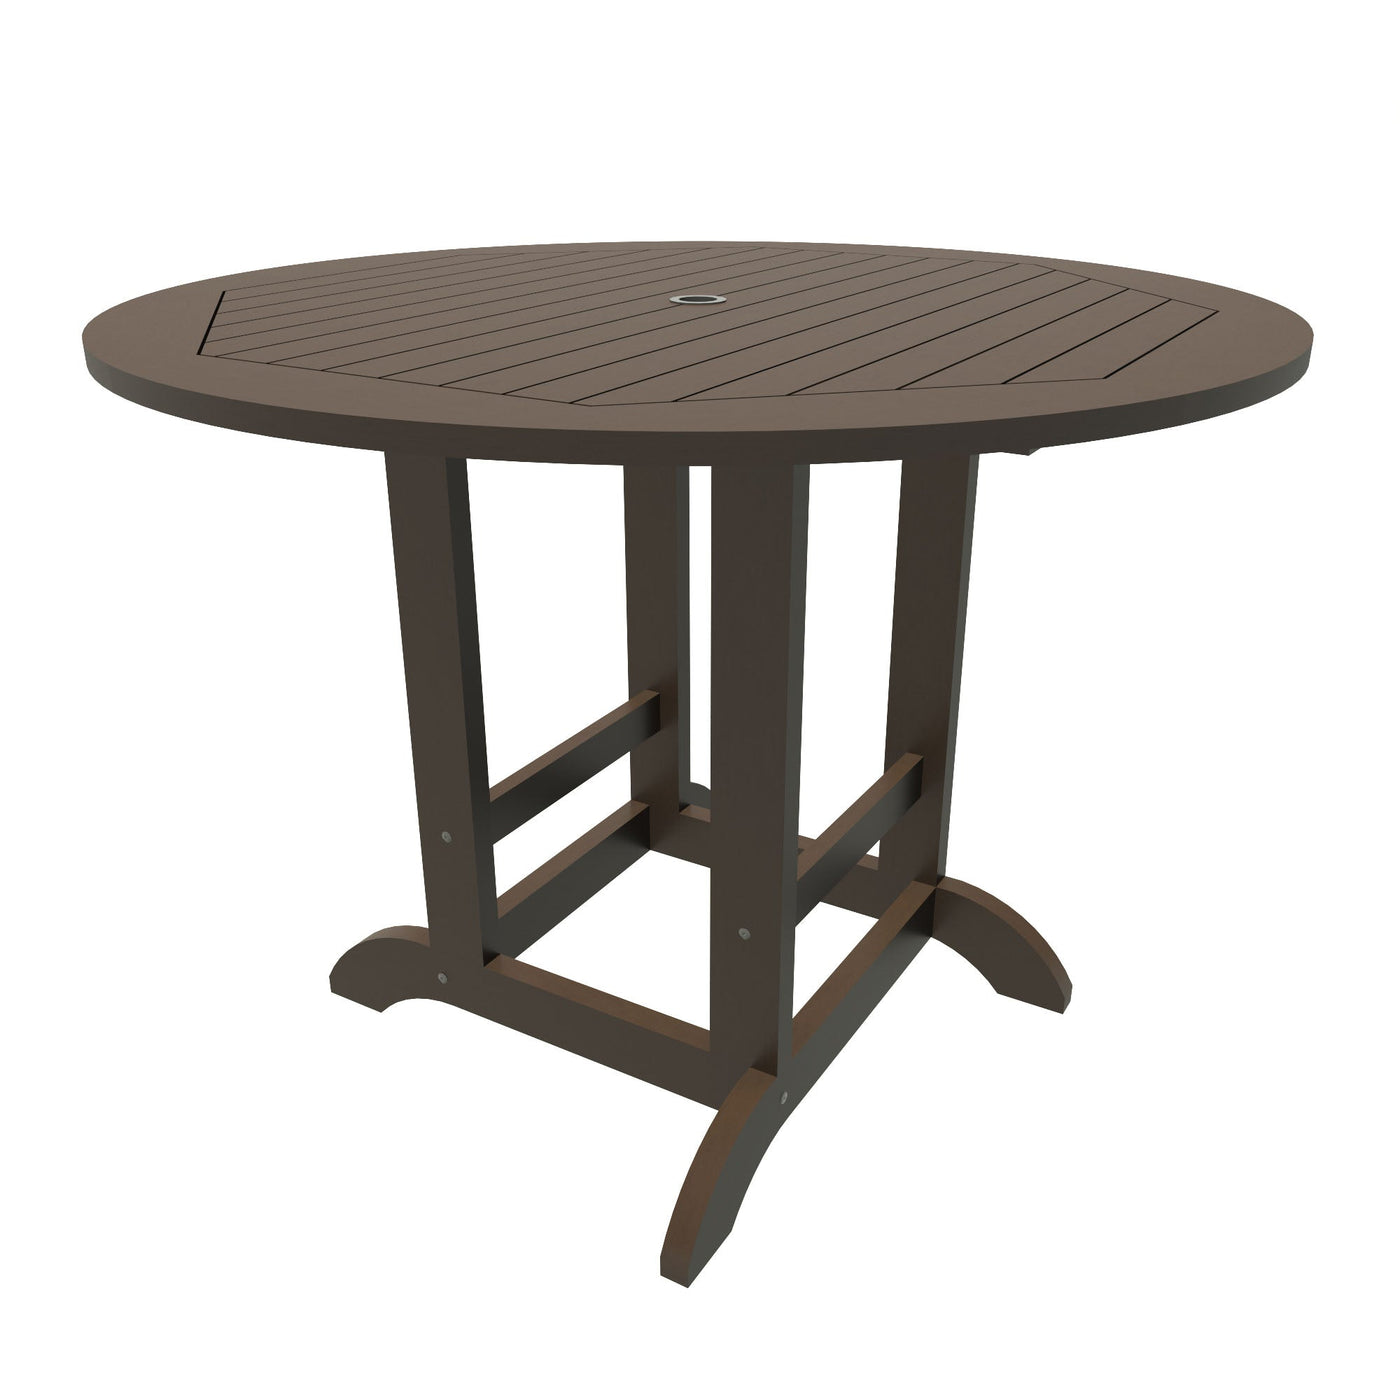 Round 48in Diameter Dining Table - Counter Height Dining Highwood USA Weathered Acorn 